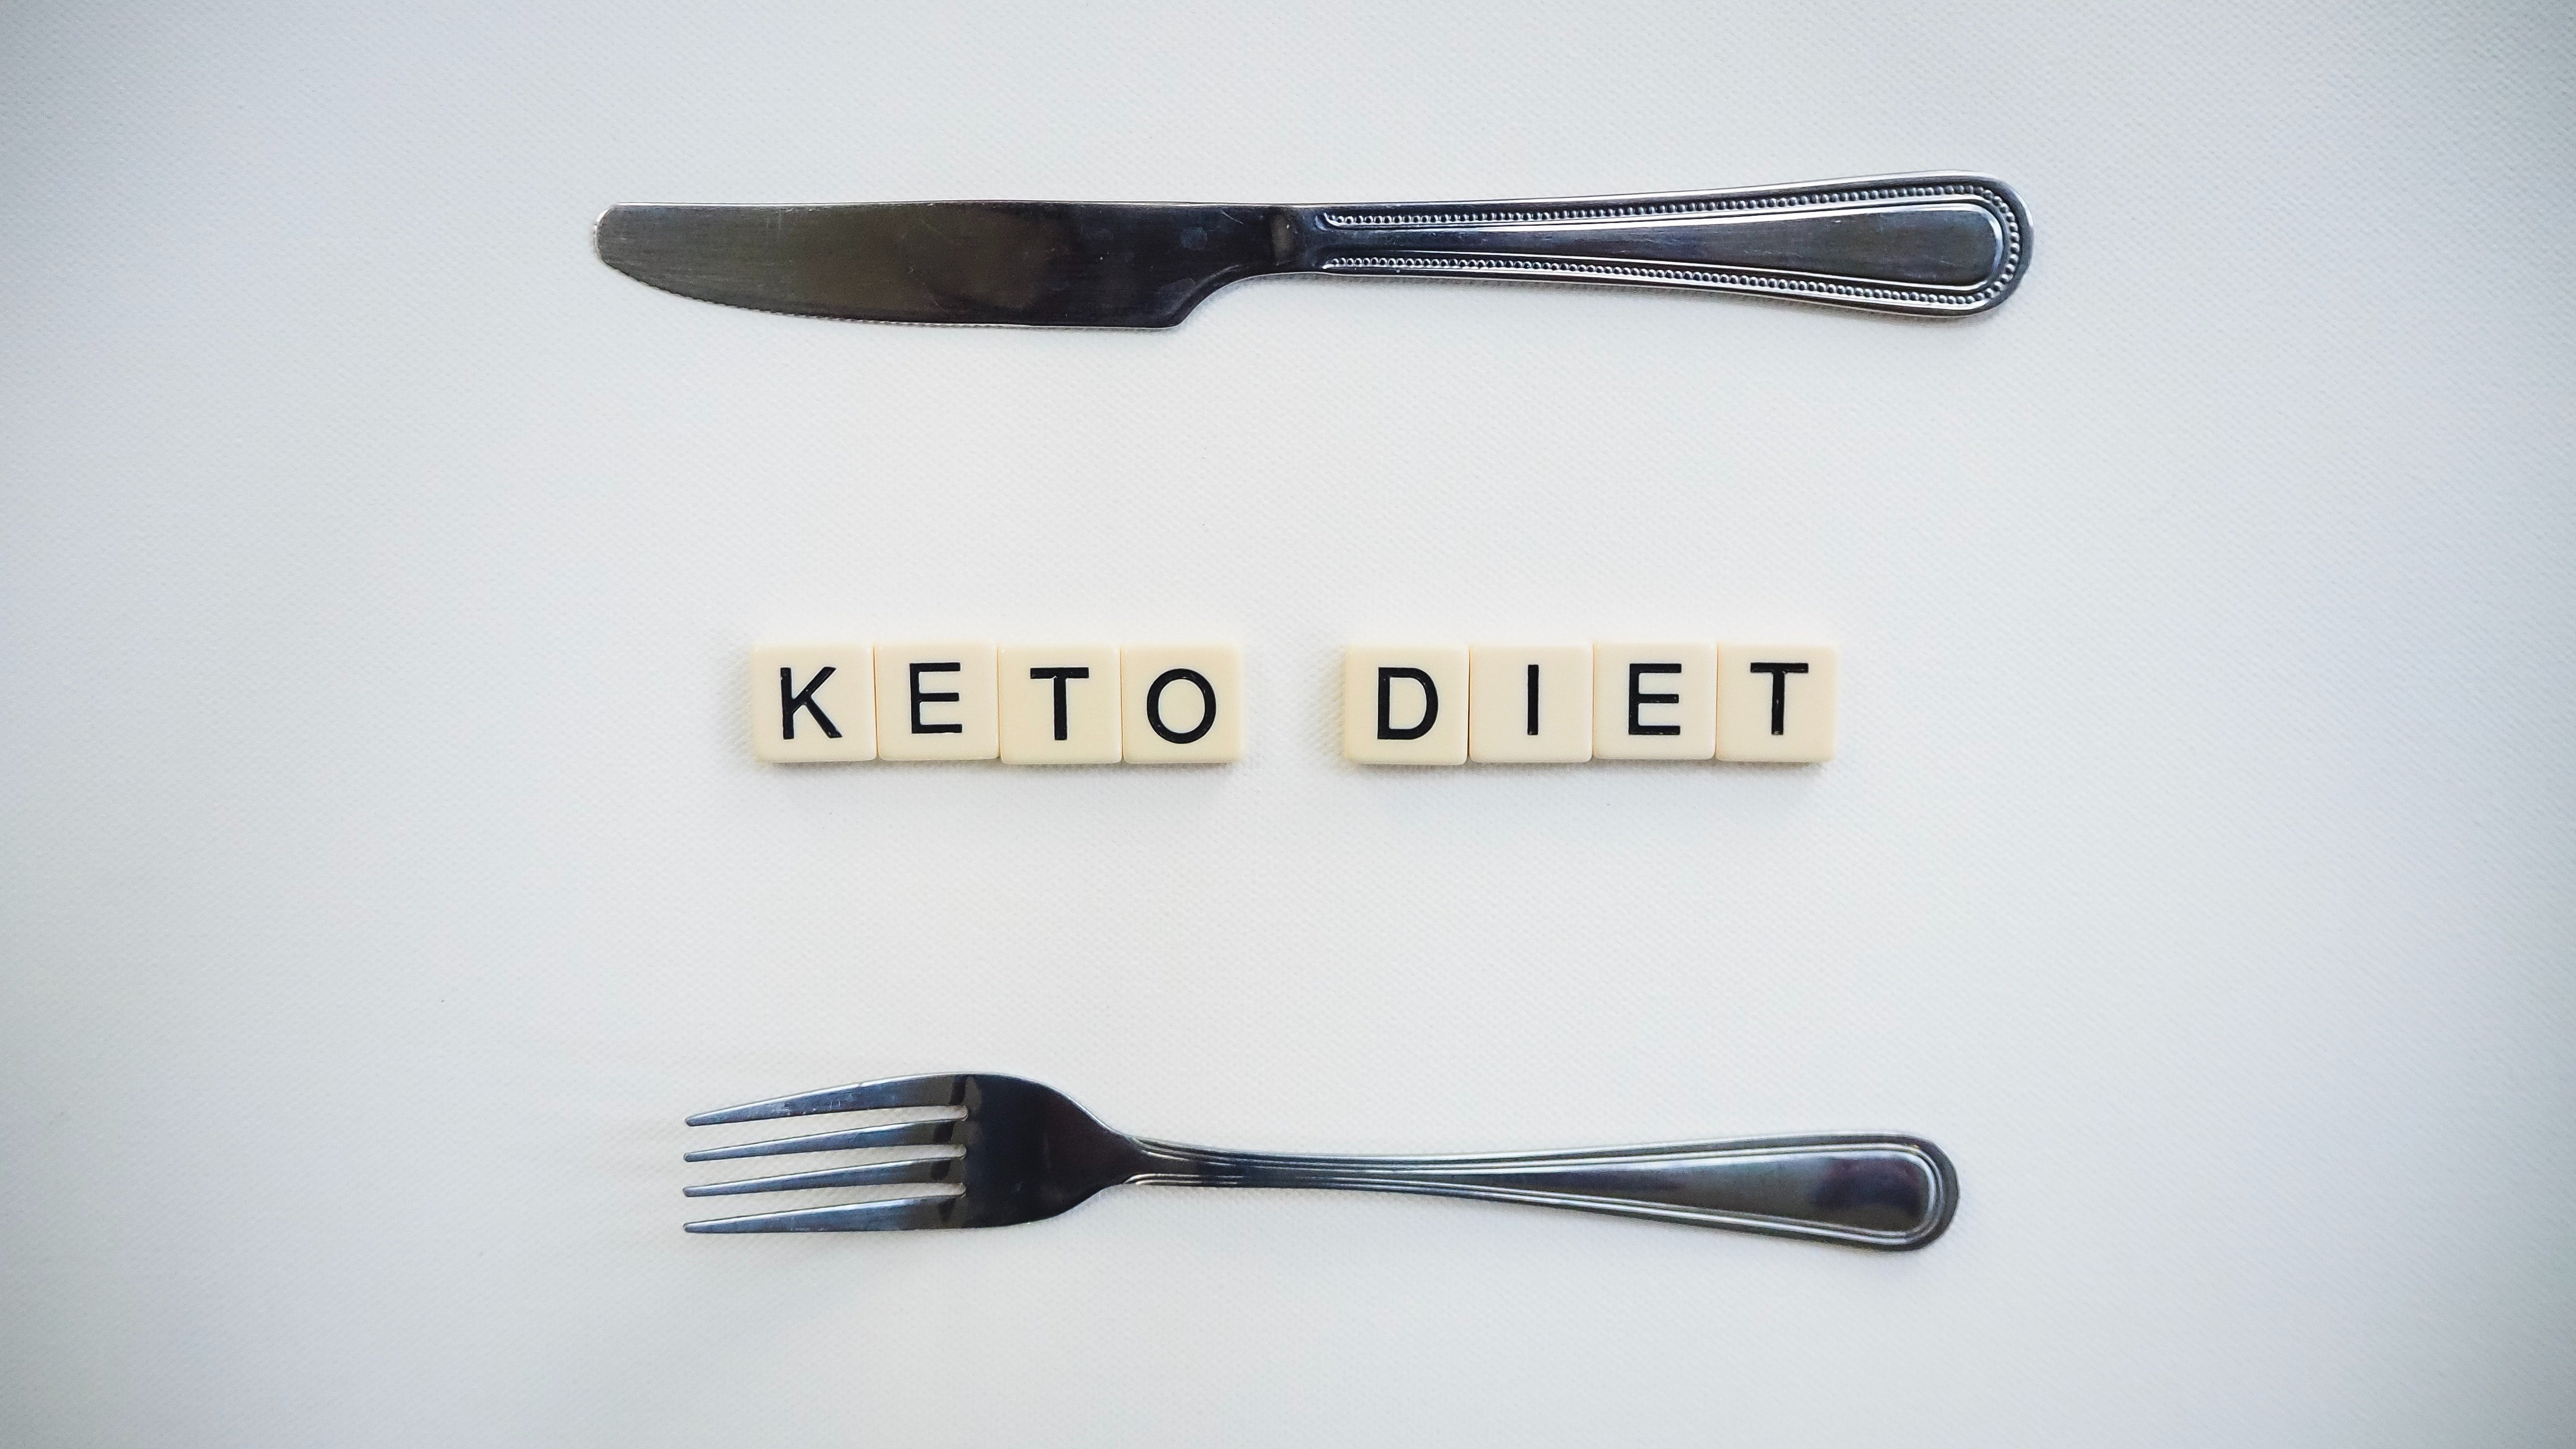 Image of Knife and Fork with Keto Diet